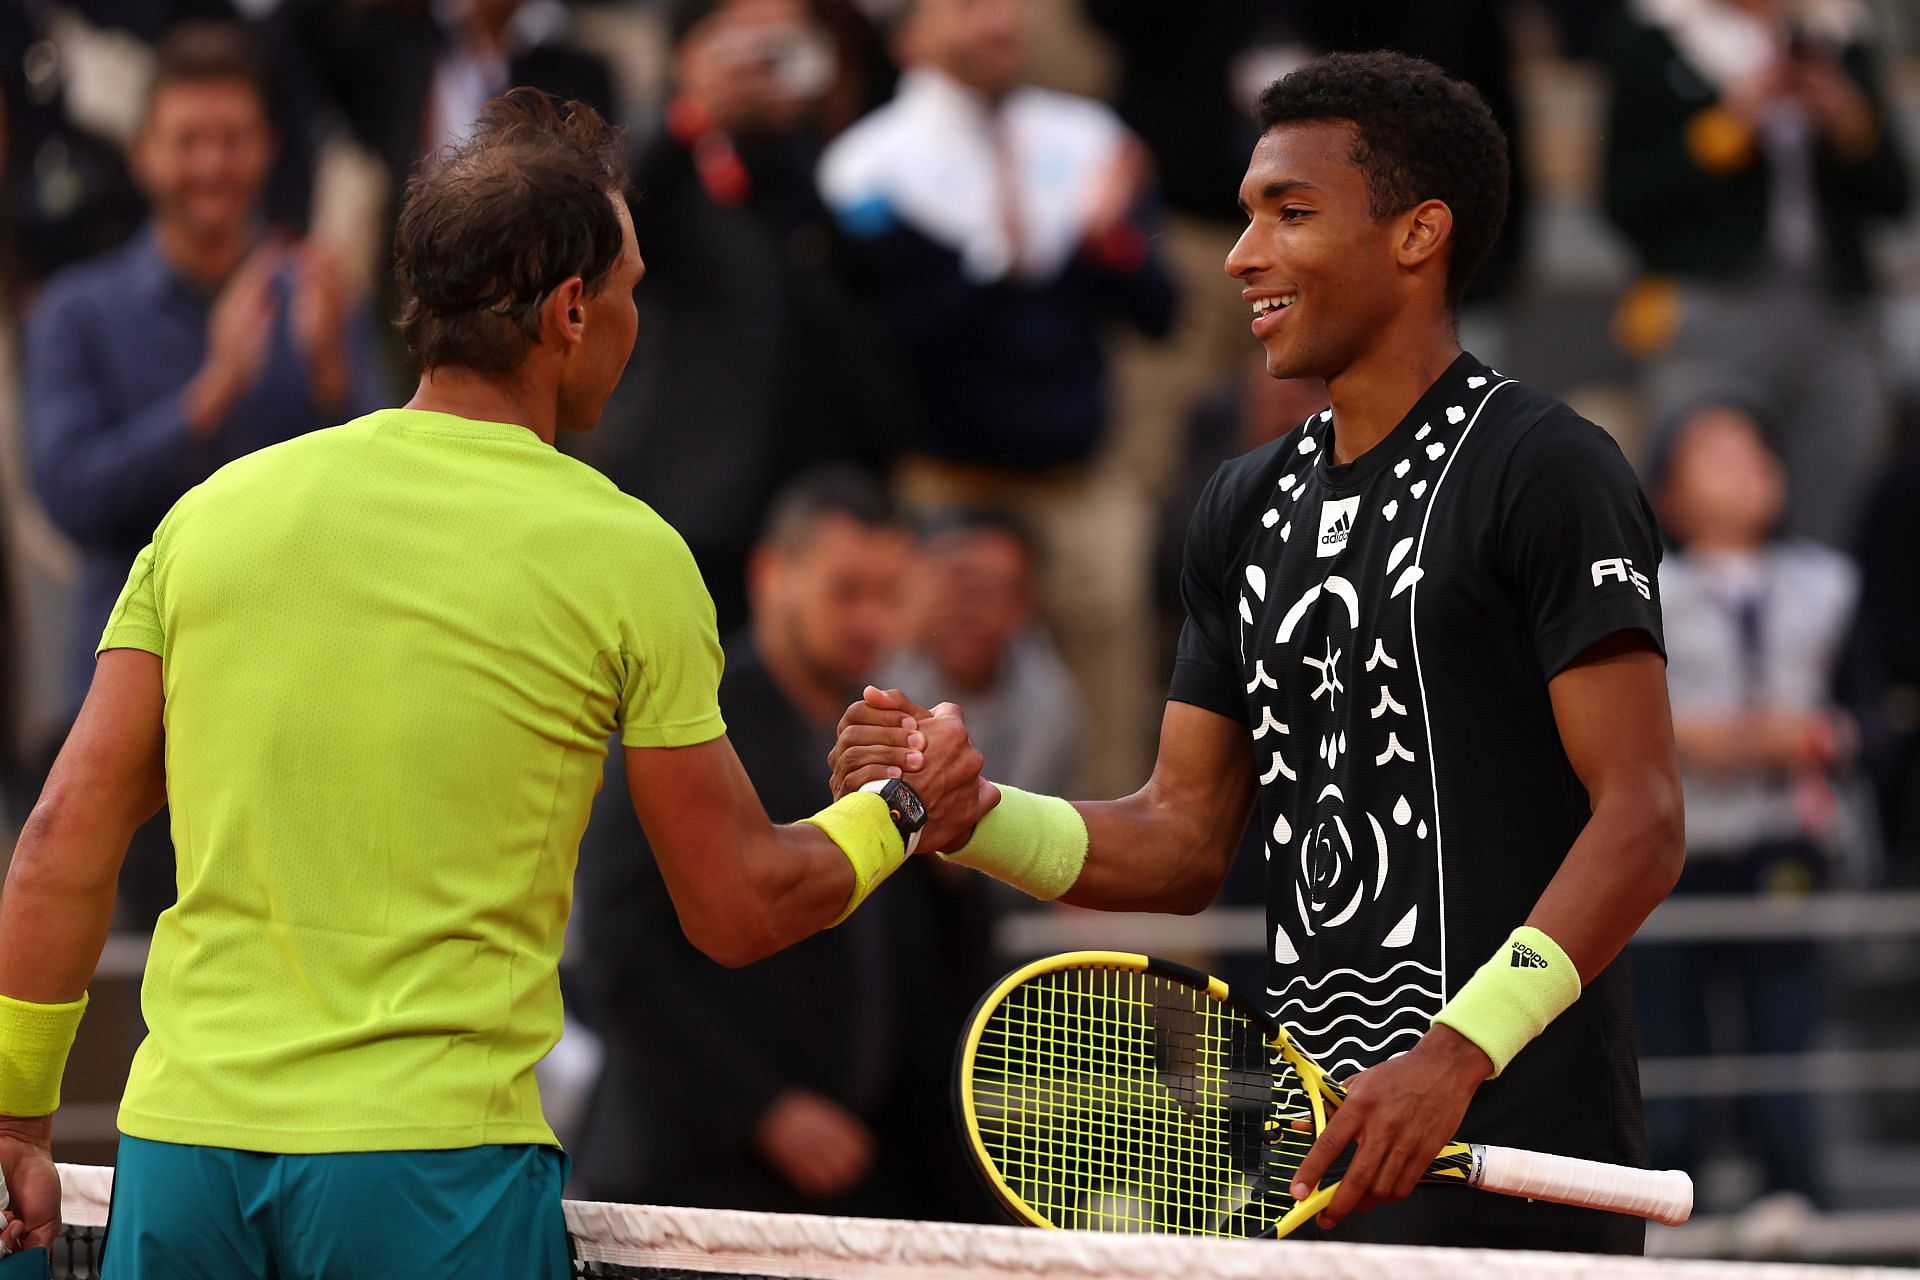 Rafael Nadal and Felix Auger-Aliassime pictured at the 2022 French Open